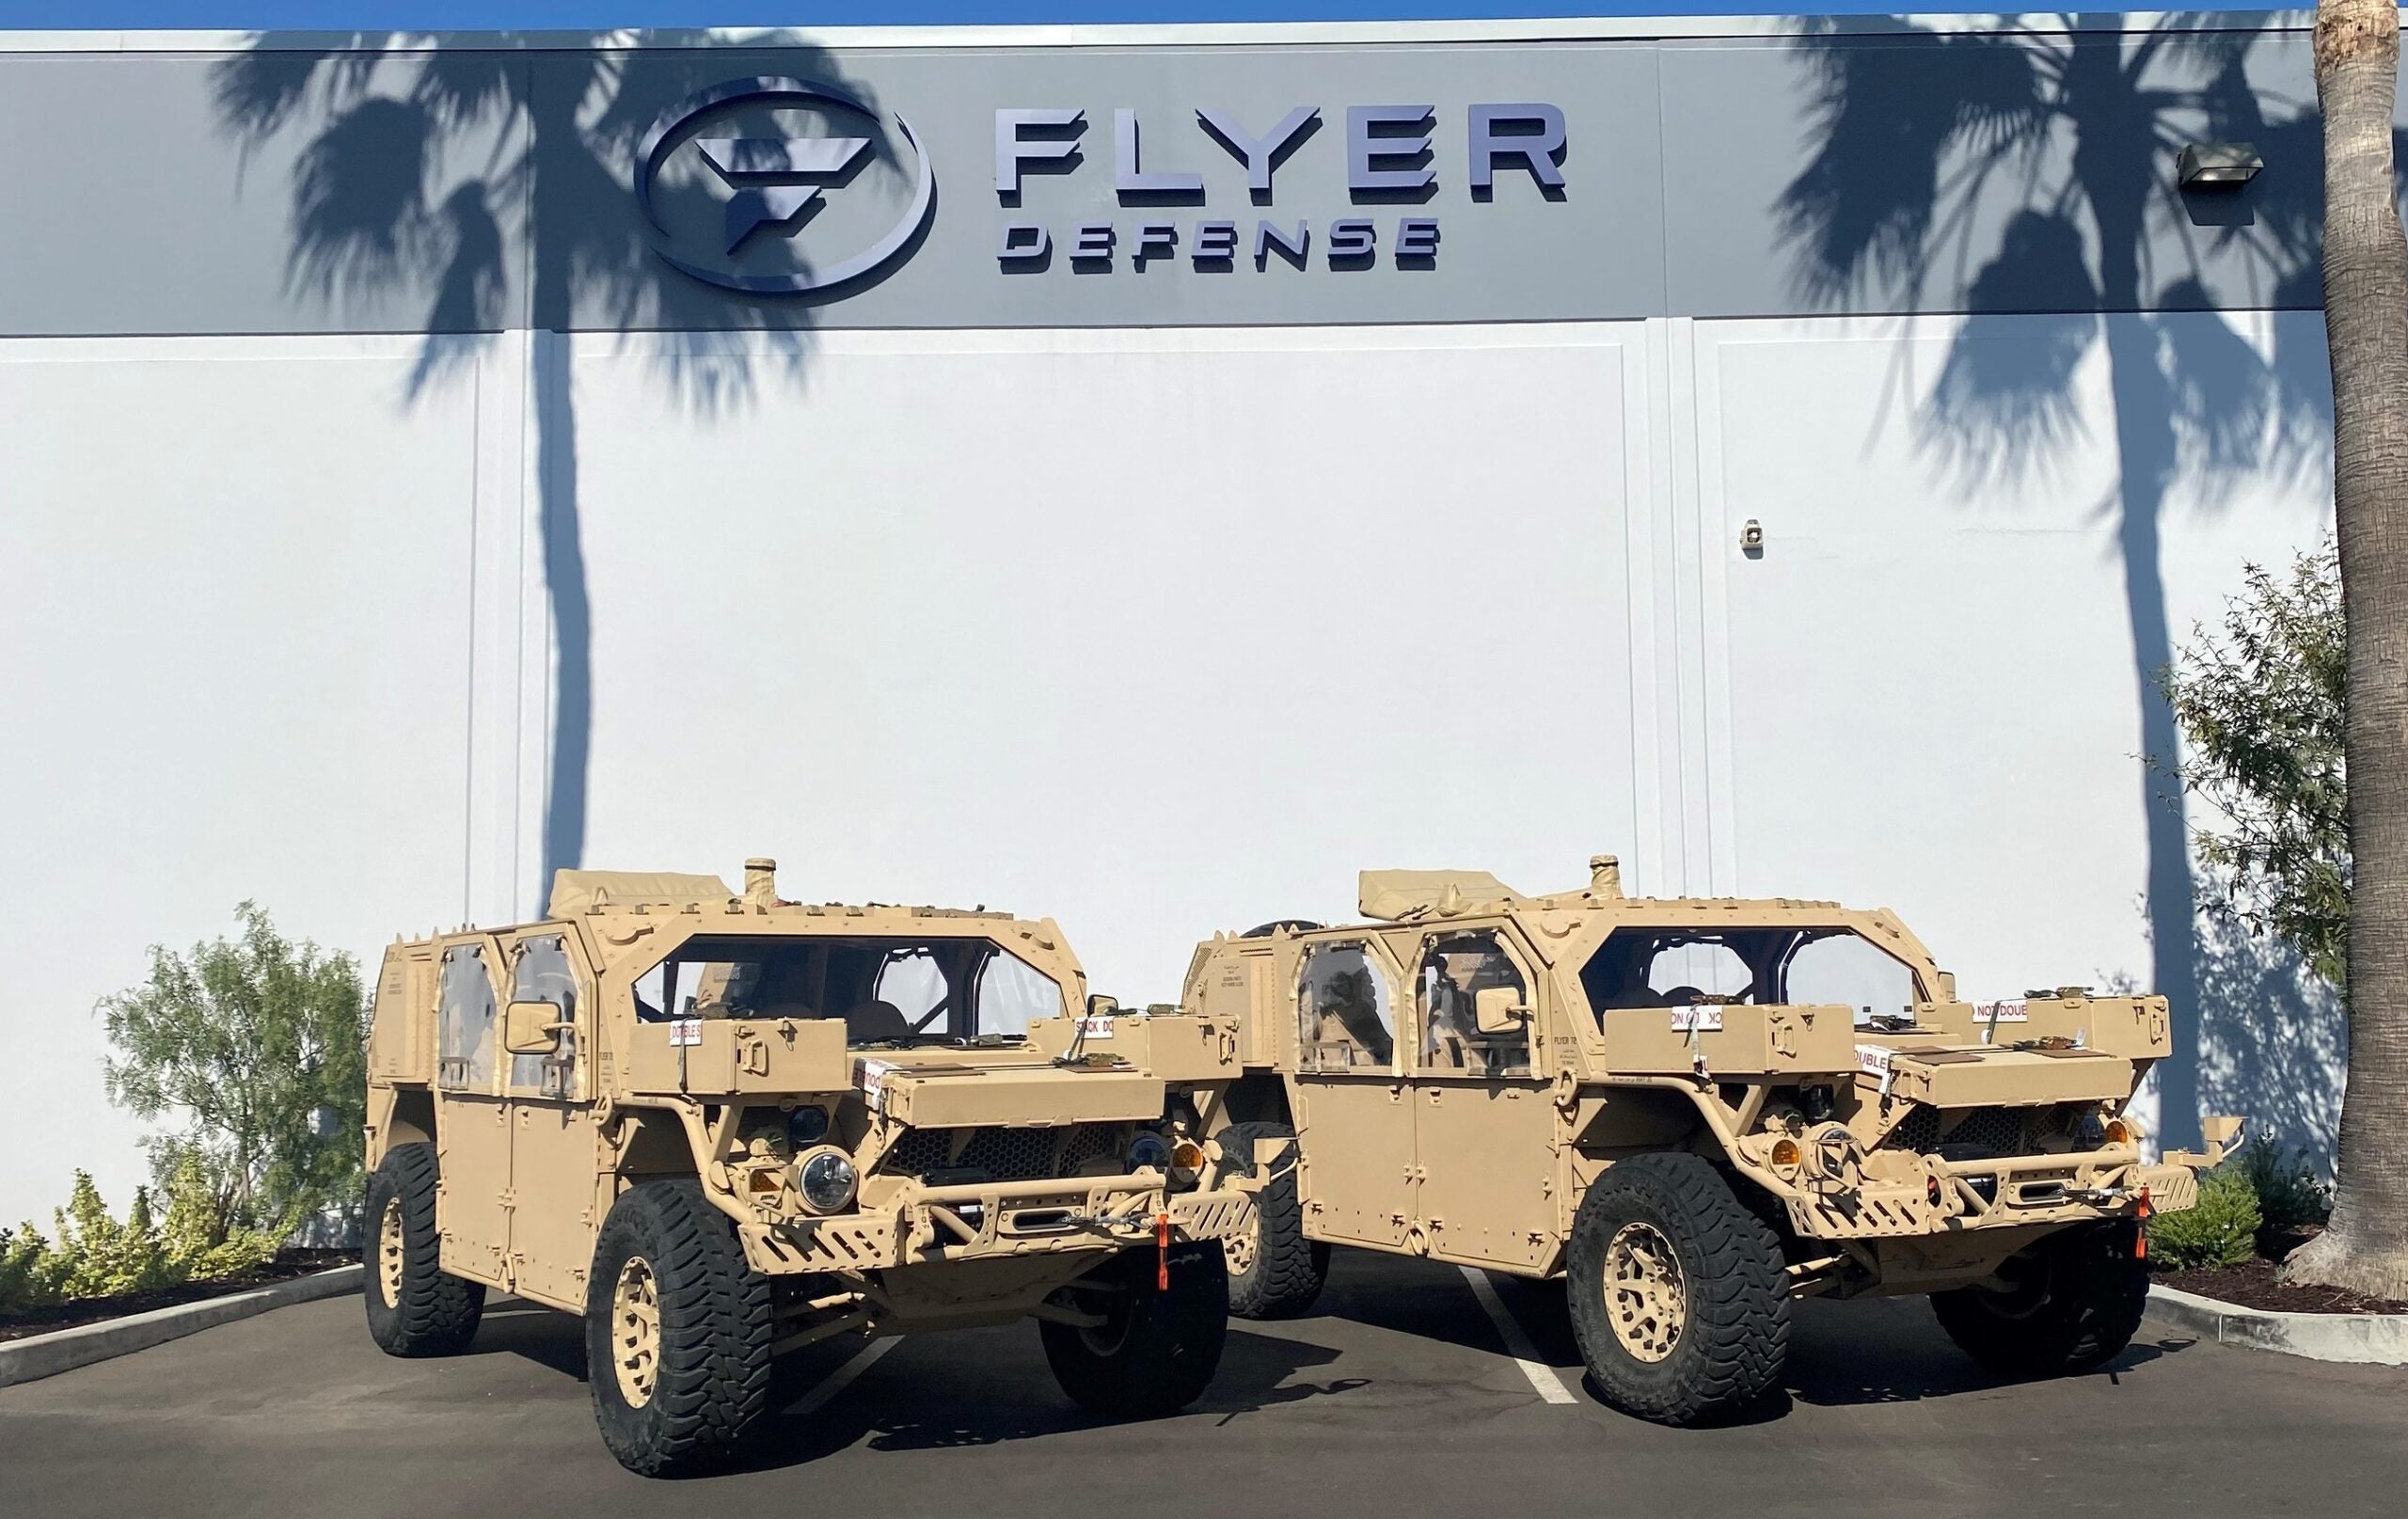 Flyer Defense completes first shipment of Flyer 72 vehicle to UAE